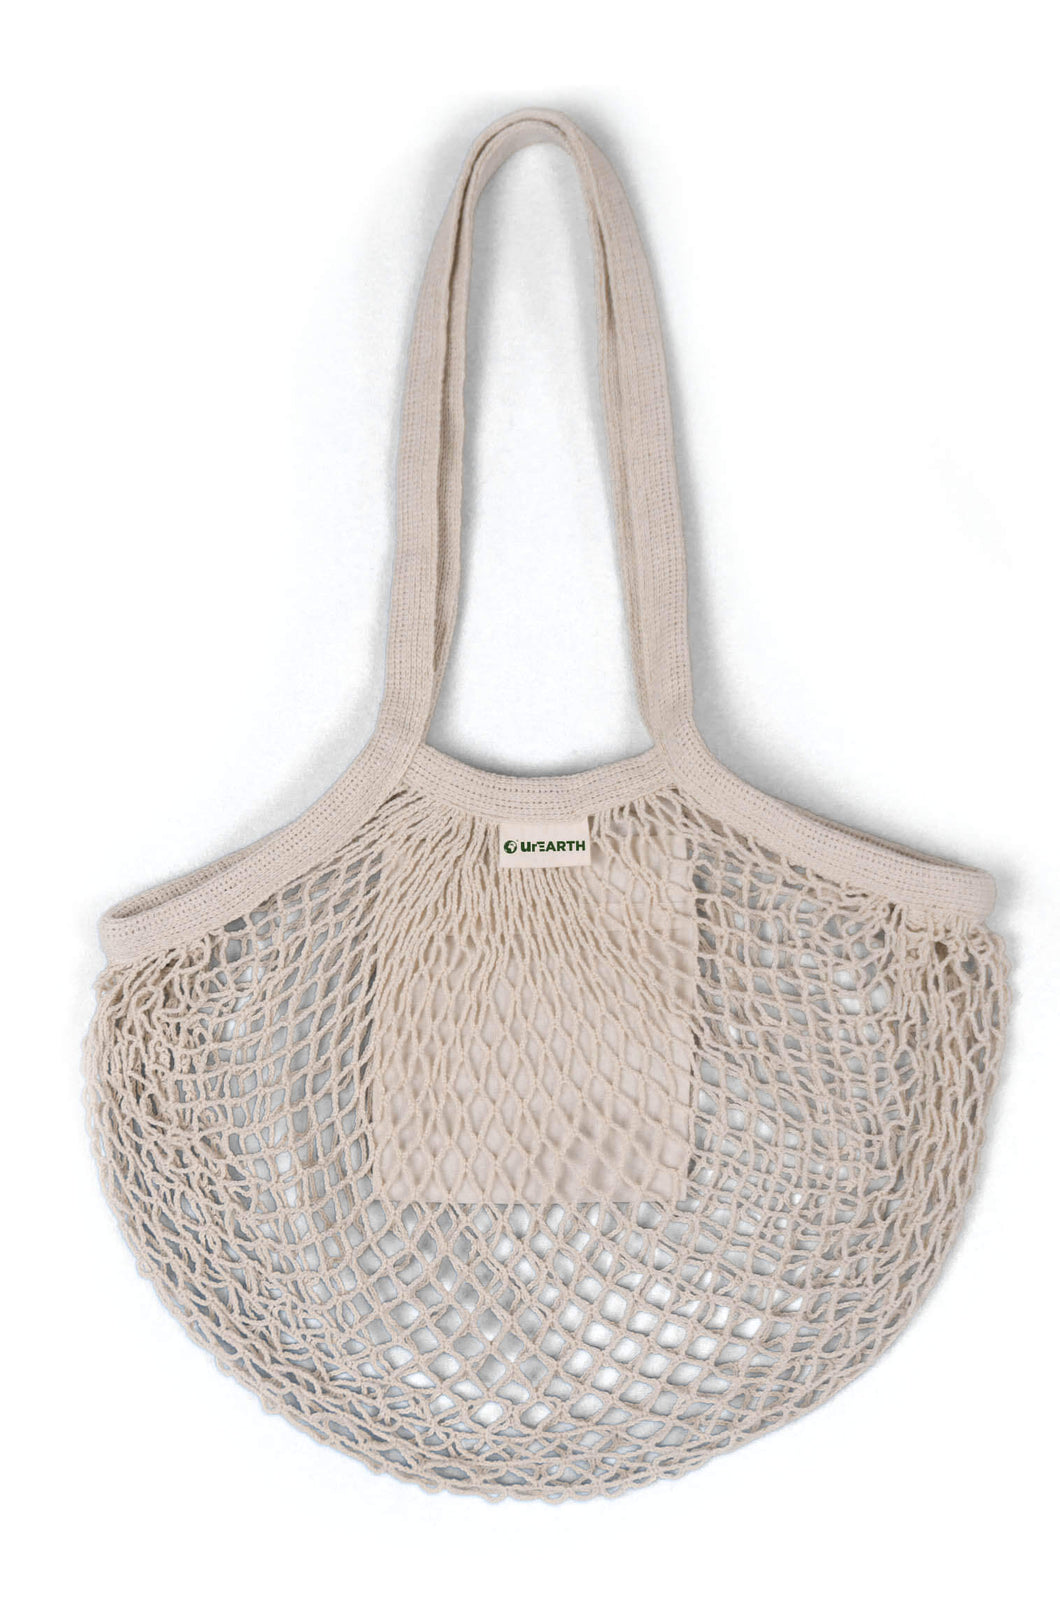 Netted Bag | UnEarth